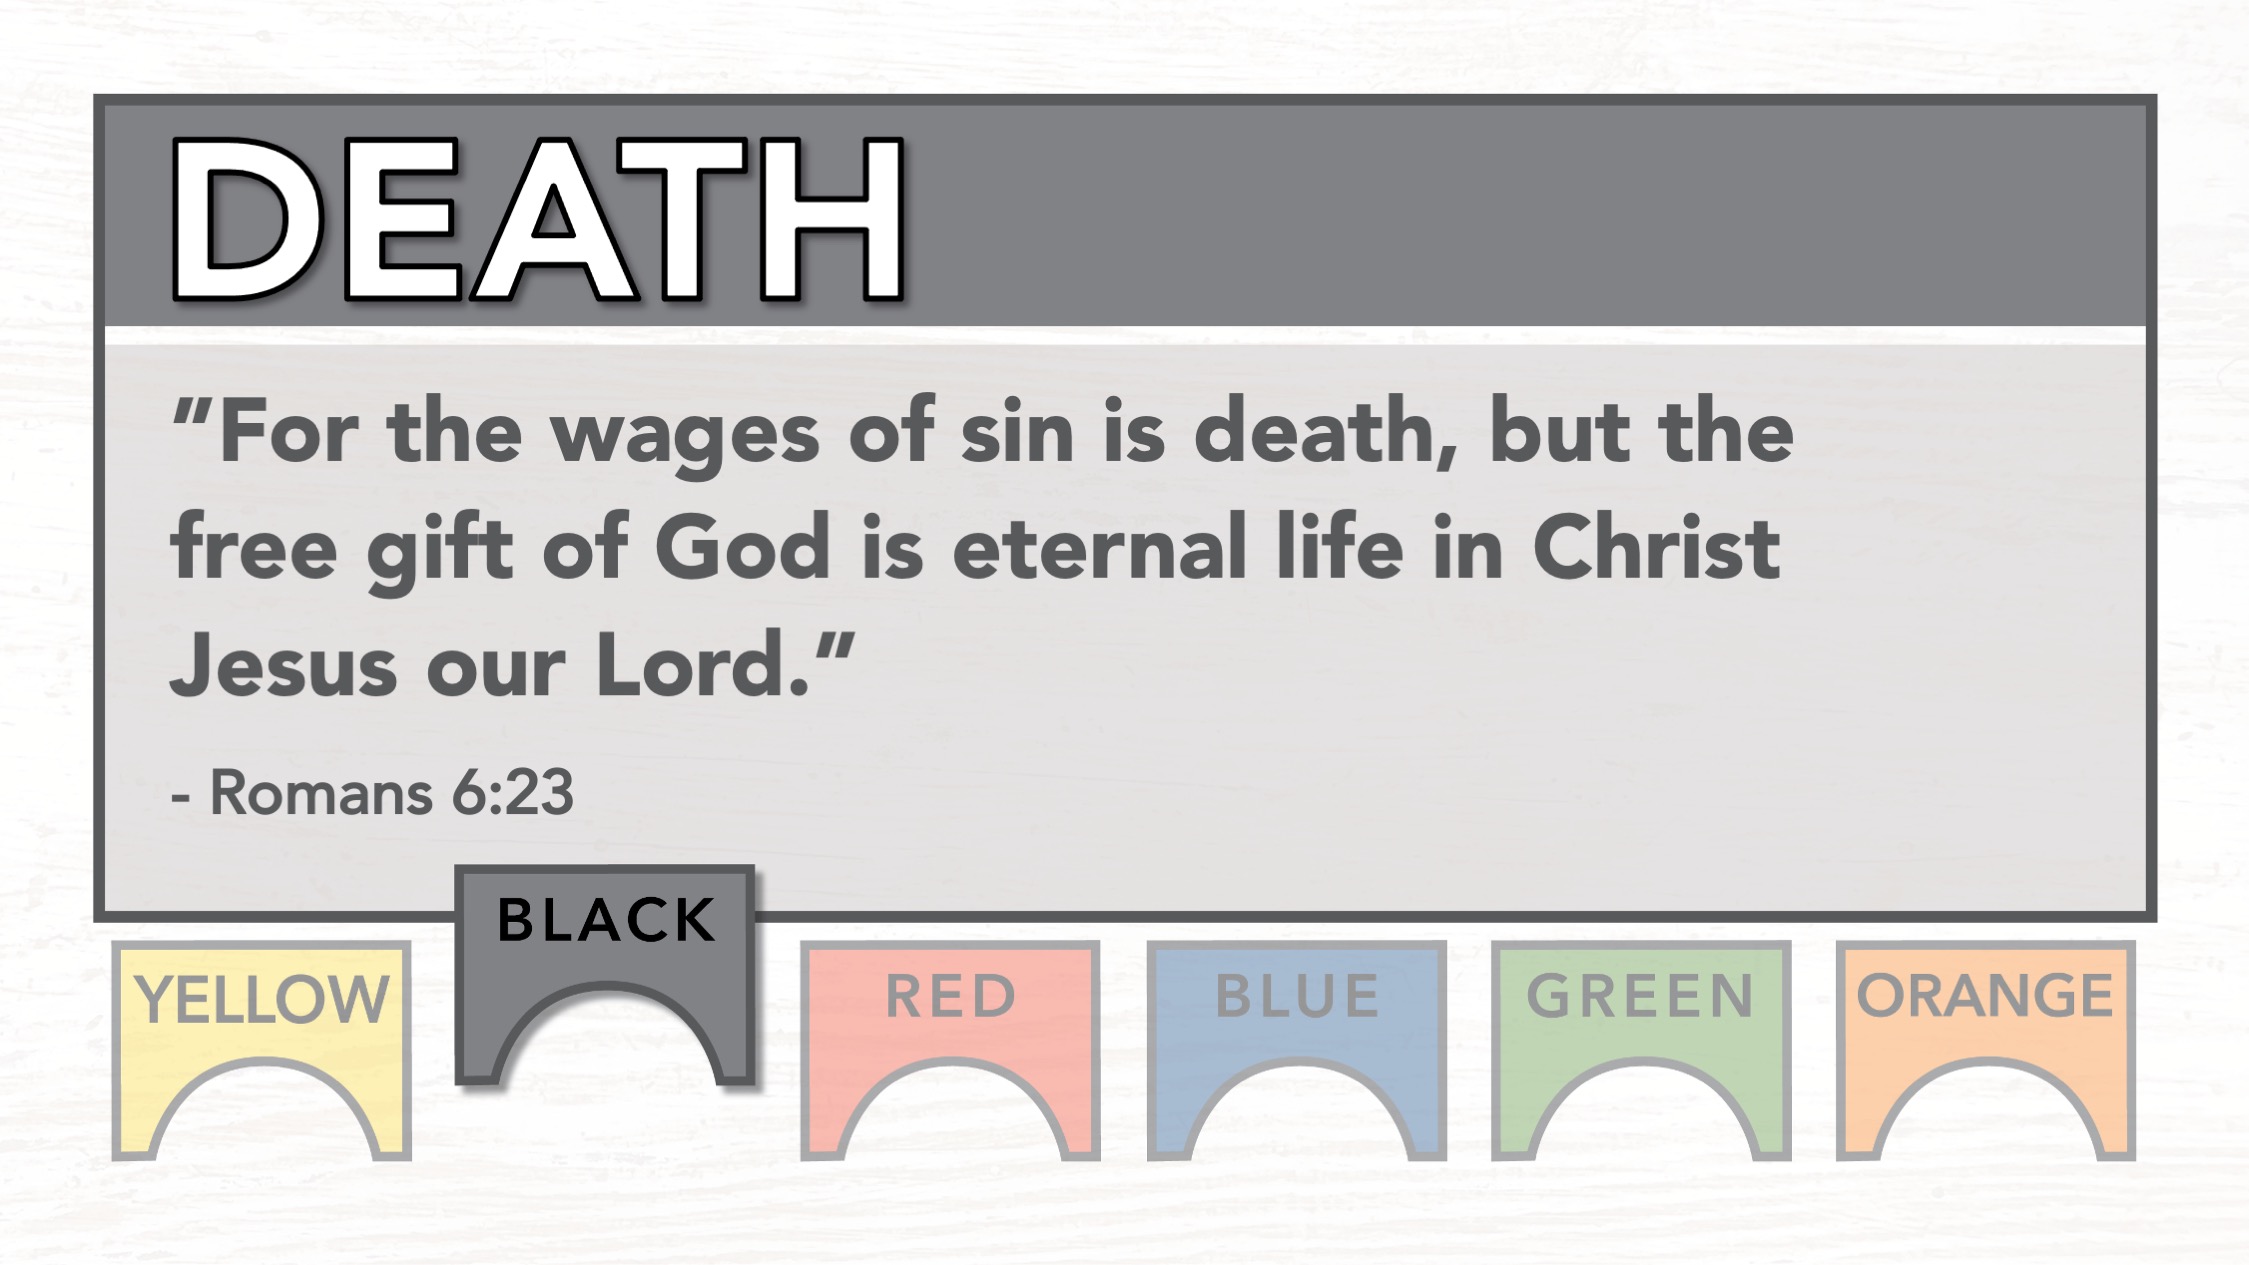 Black - Death: "For the wages of sin is death, but the free gift of God is eternal life in Christ Jesus our Lord." Romans 6:23